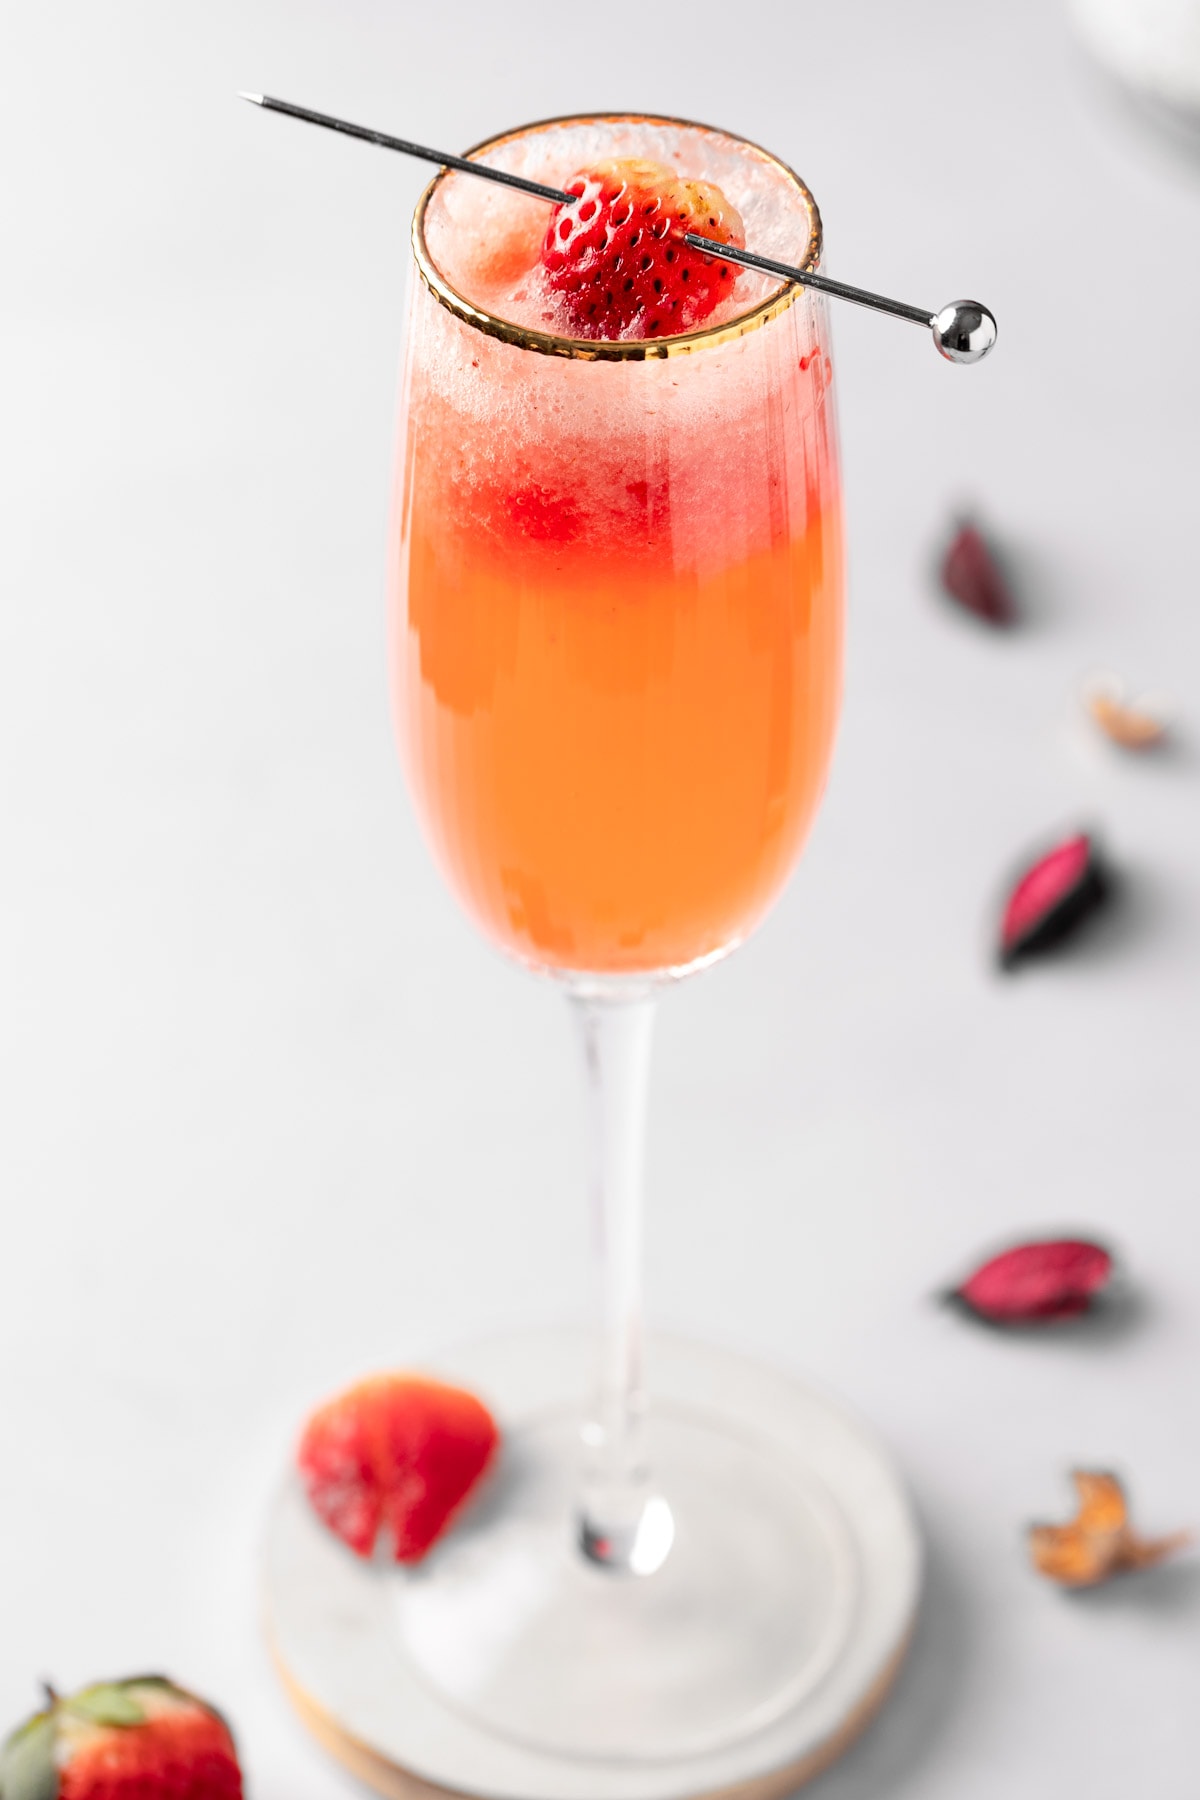 A strawberry bellini with prosecco, garnished with a strawberry slice.